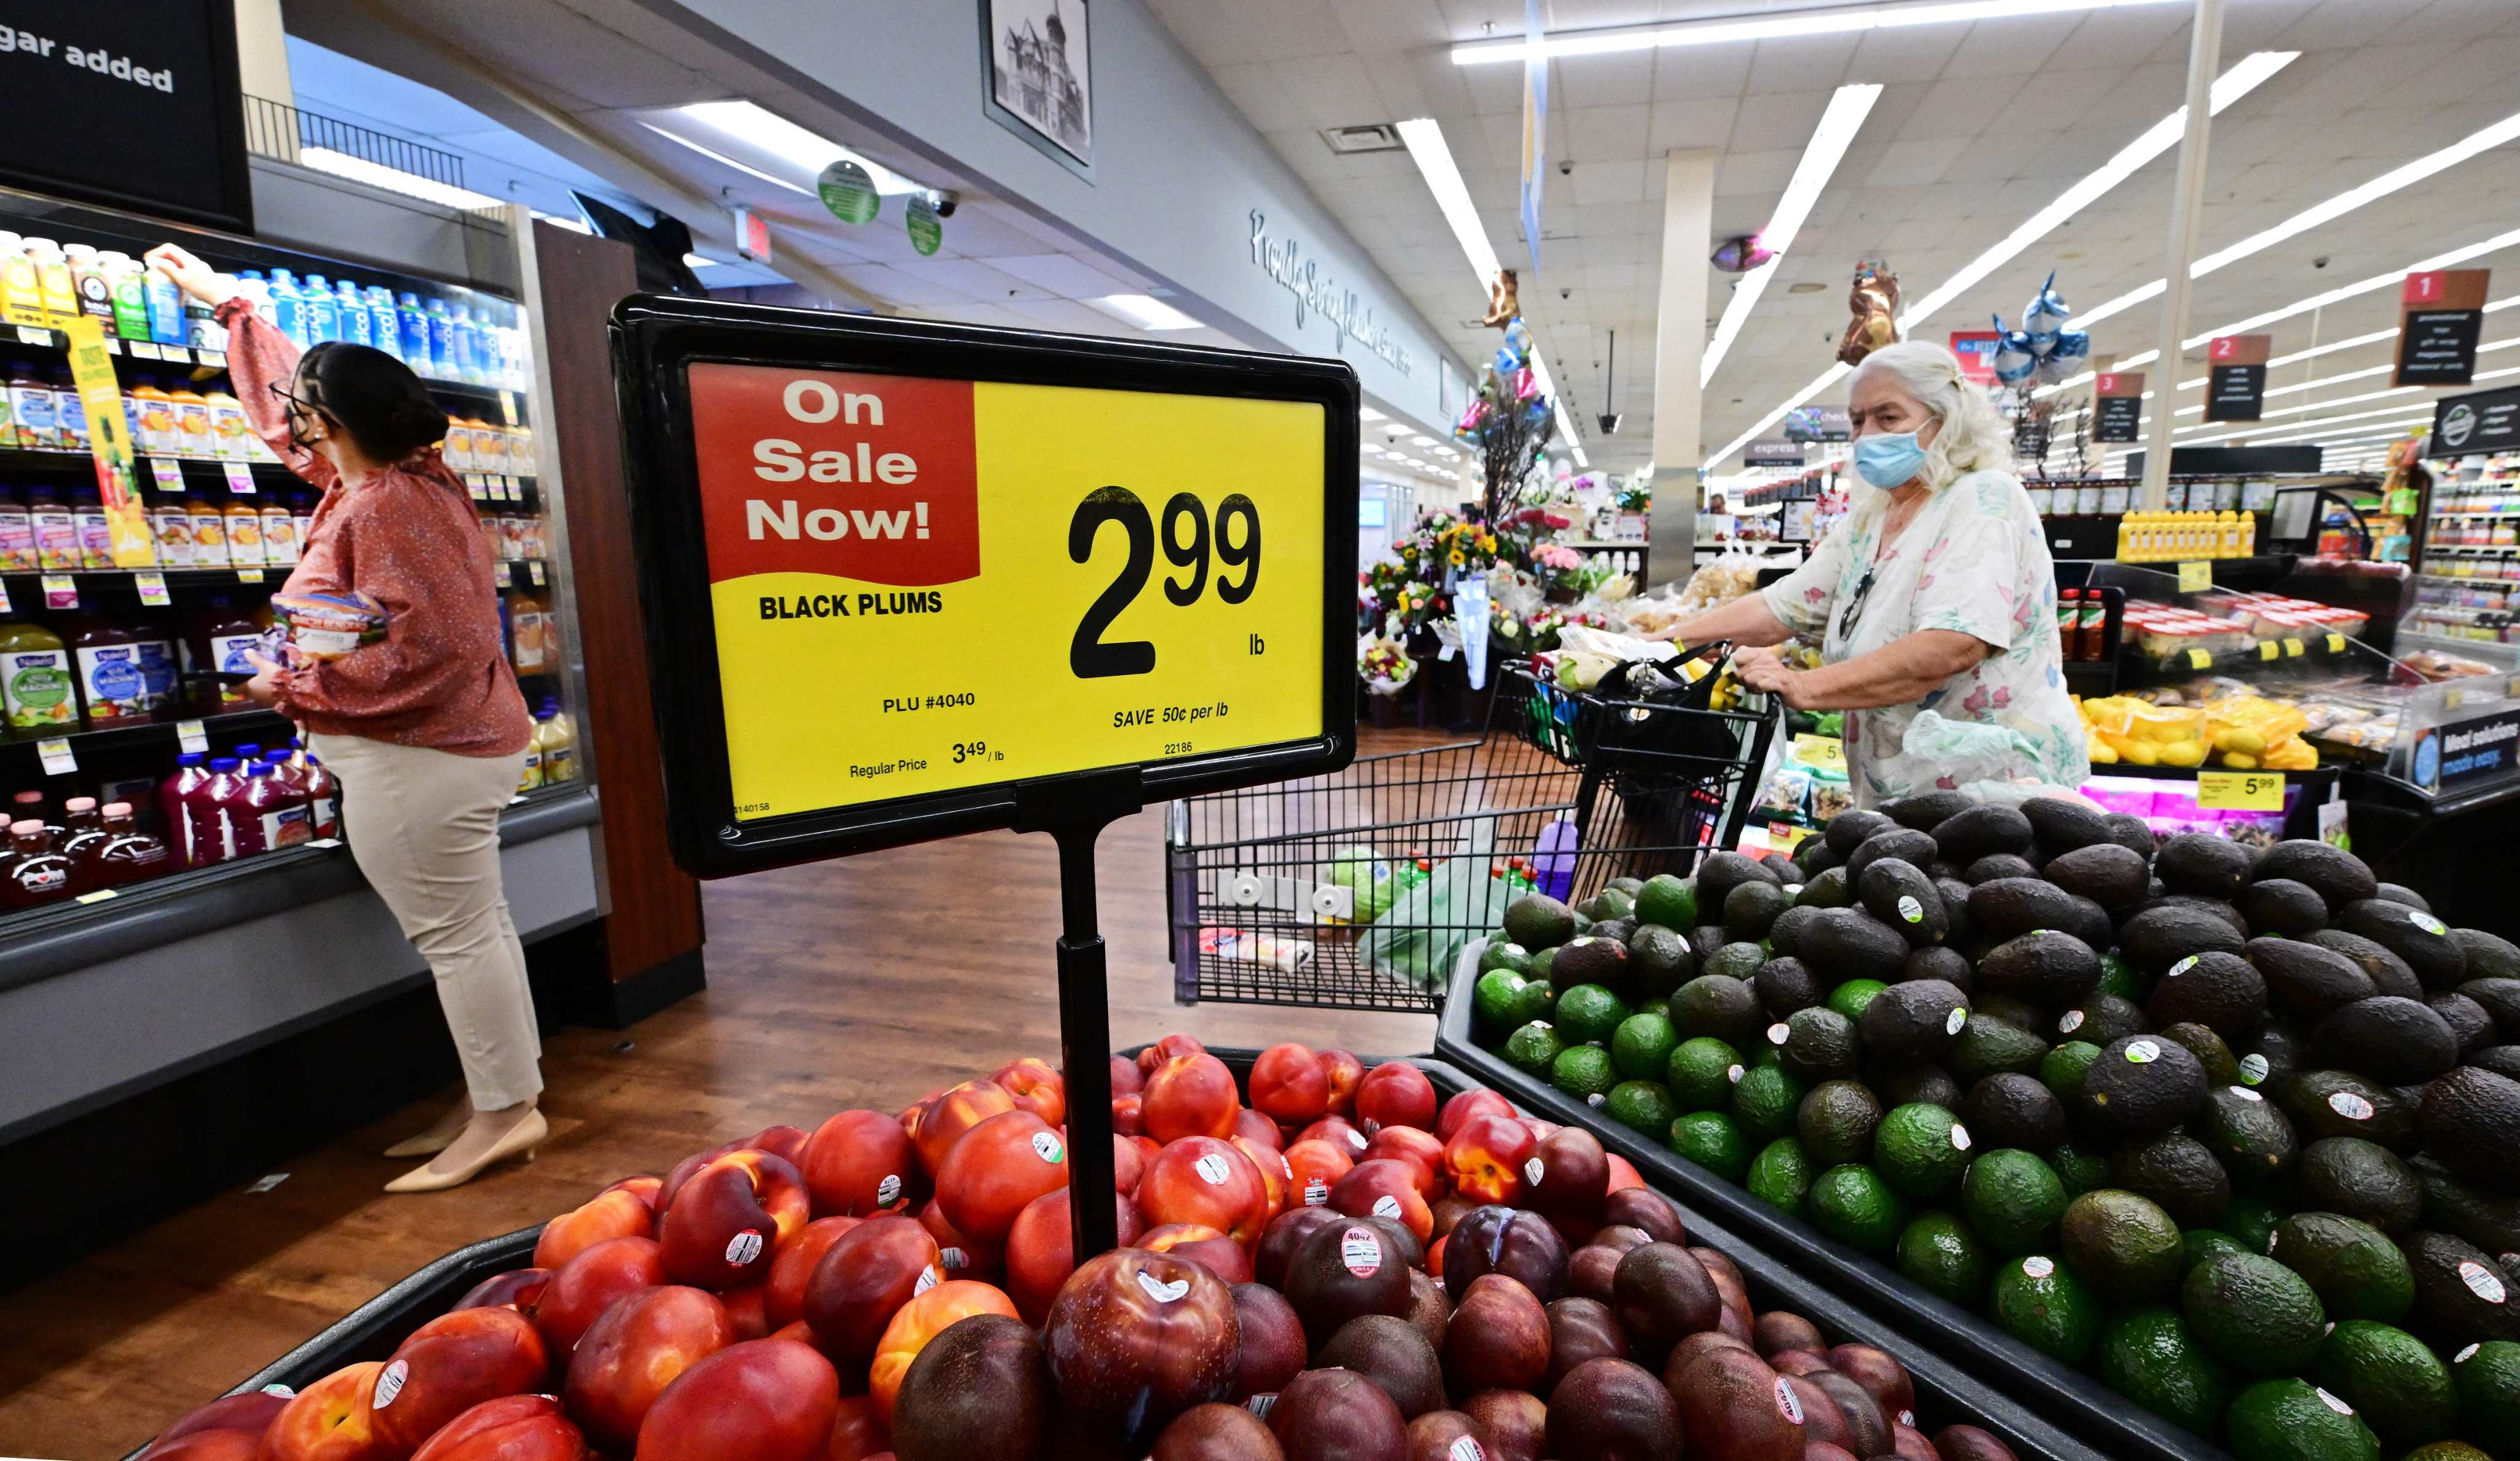 People shop at a supermarket in Alhambra, California, on July 13. US consumer price inflation surged 9.1 per cent over the 12 months to June, the fastest increase since November 1981. Photo: AFP